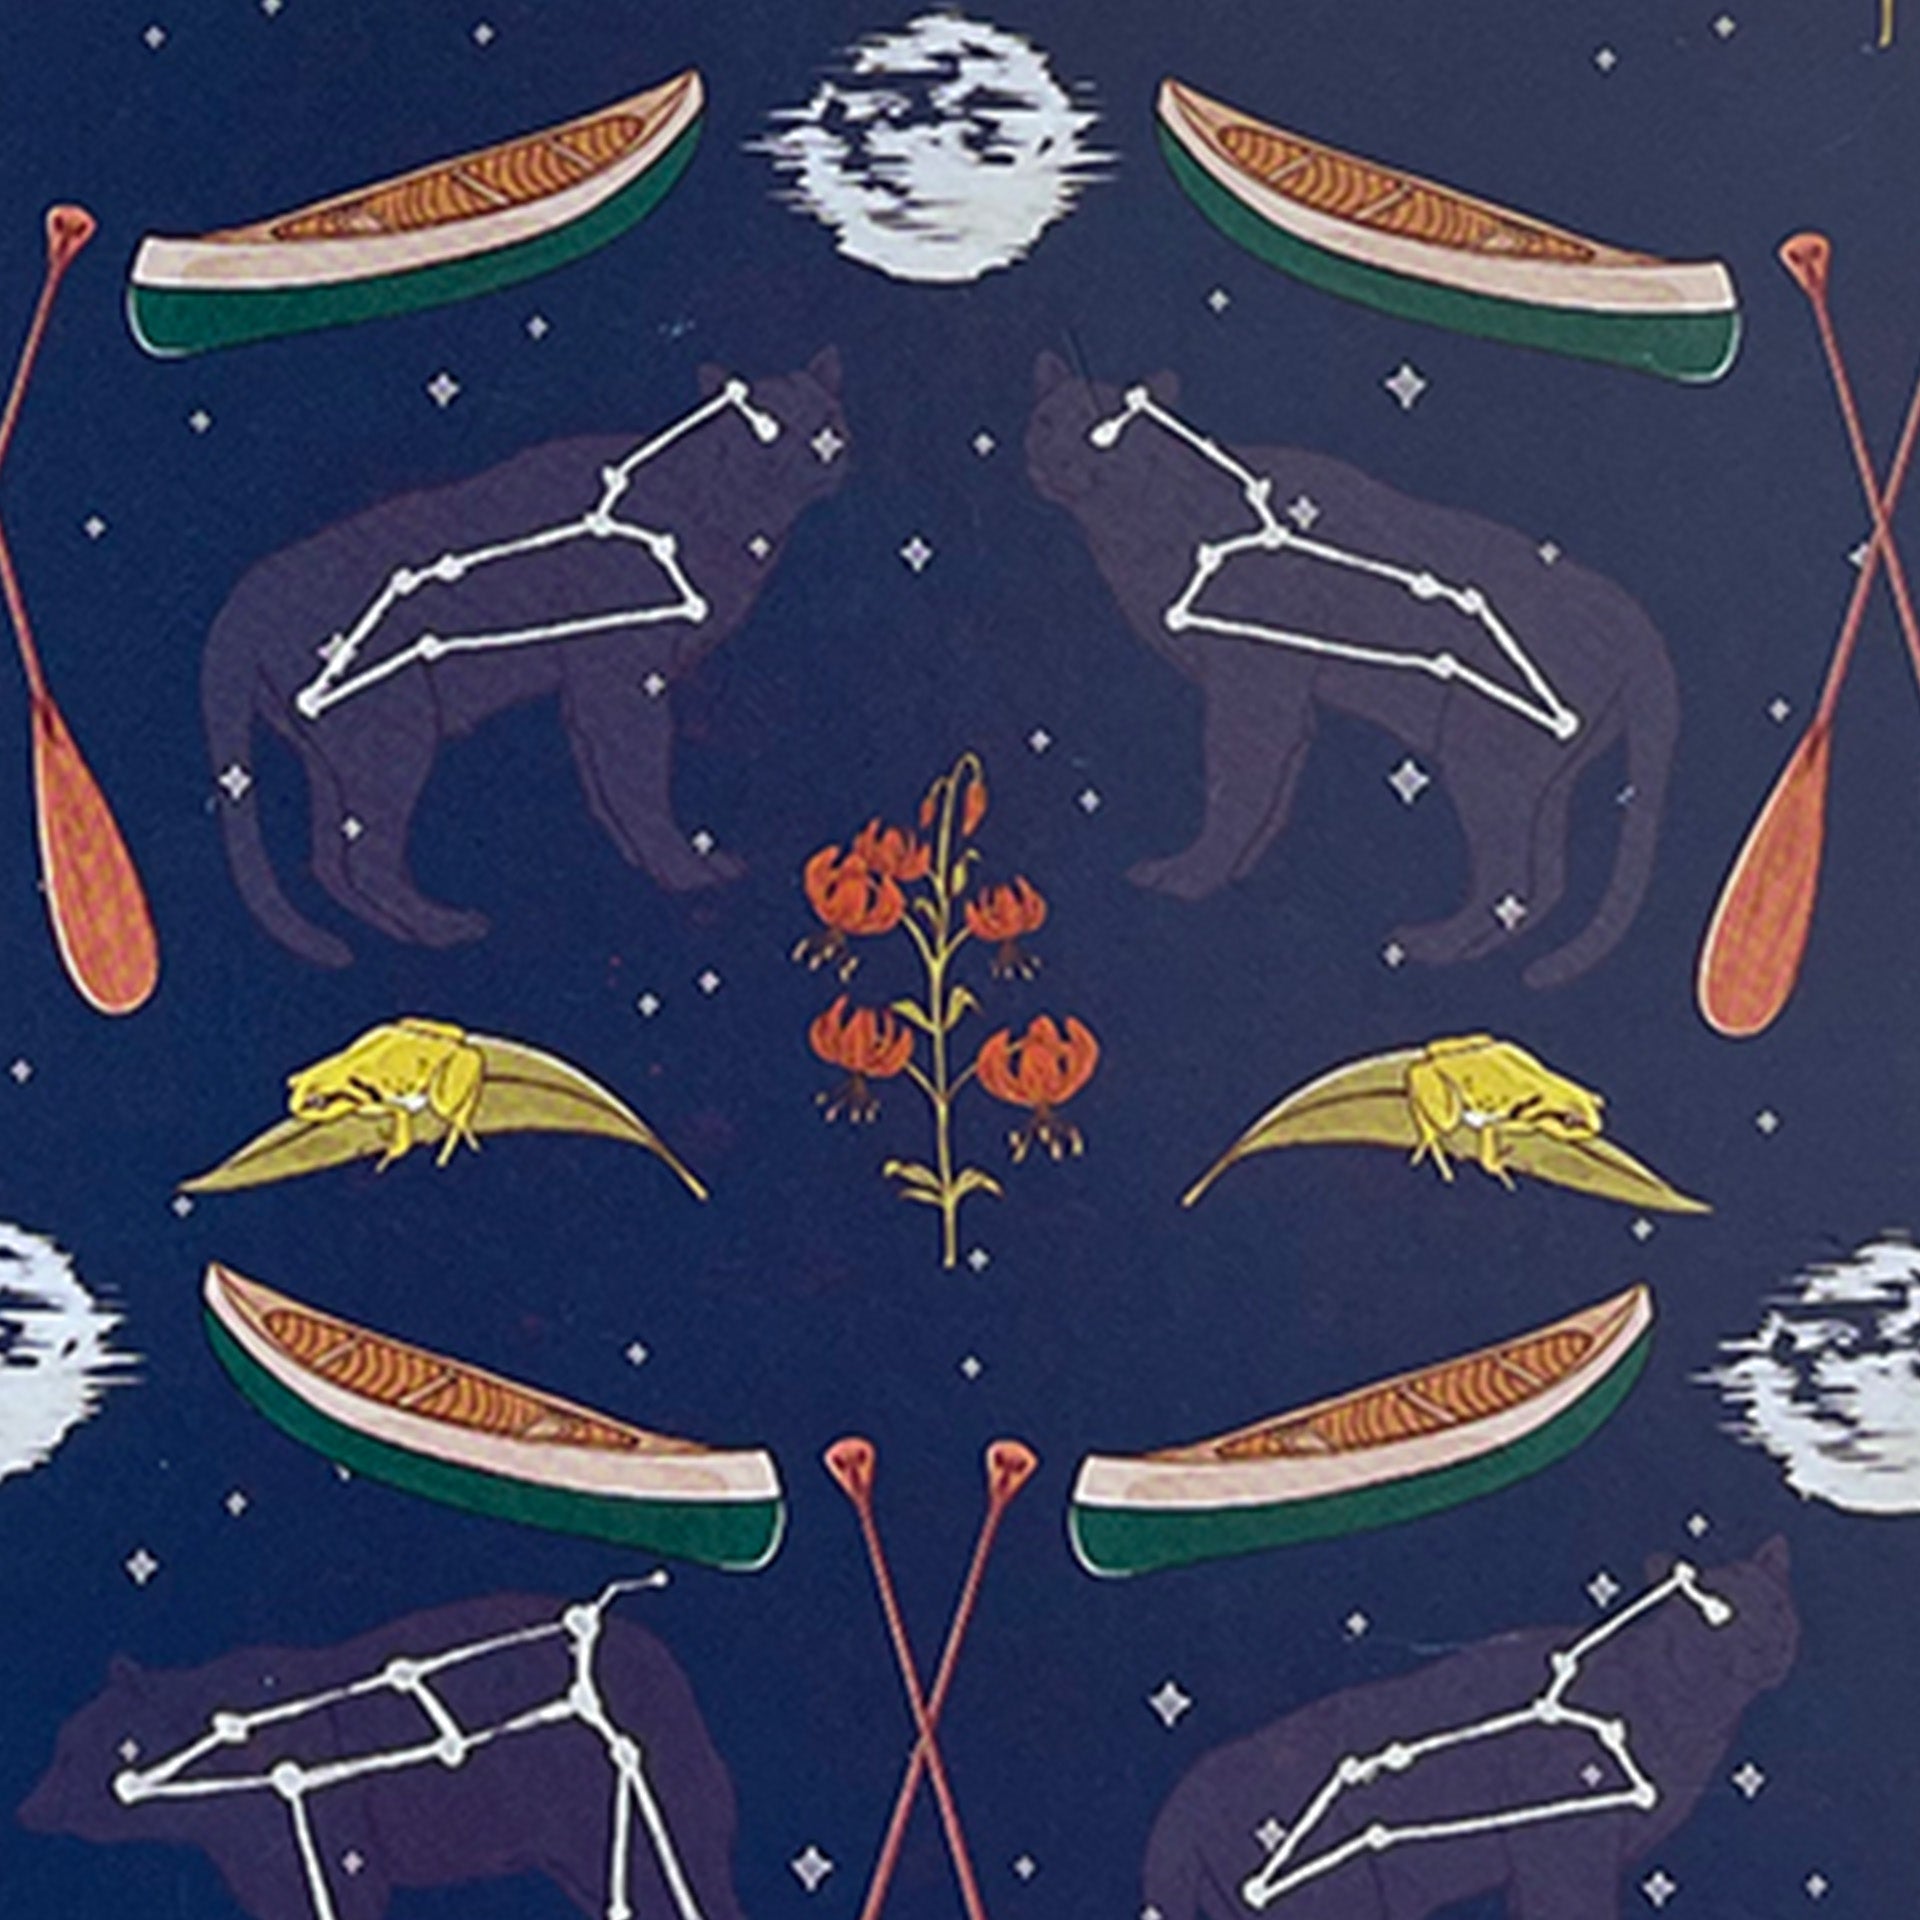 Closeup of canoes and constellations printed on blue